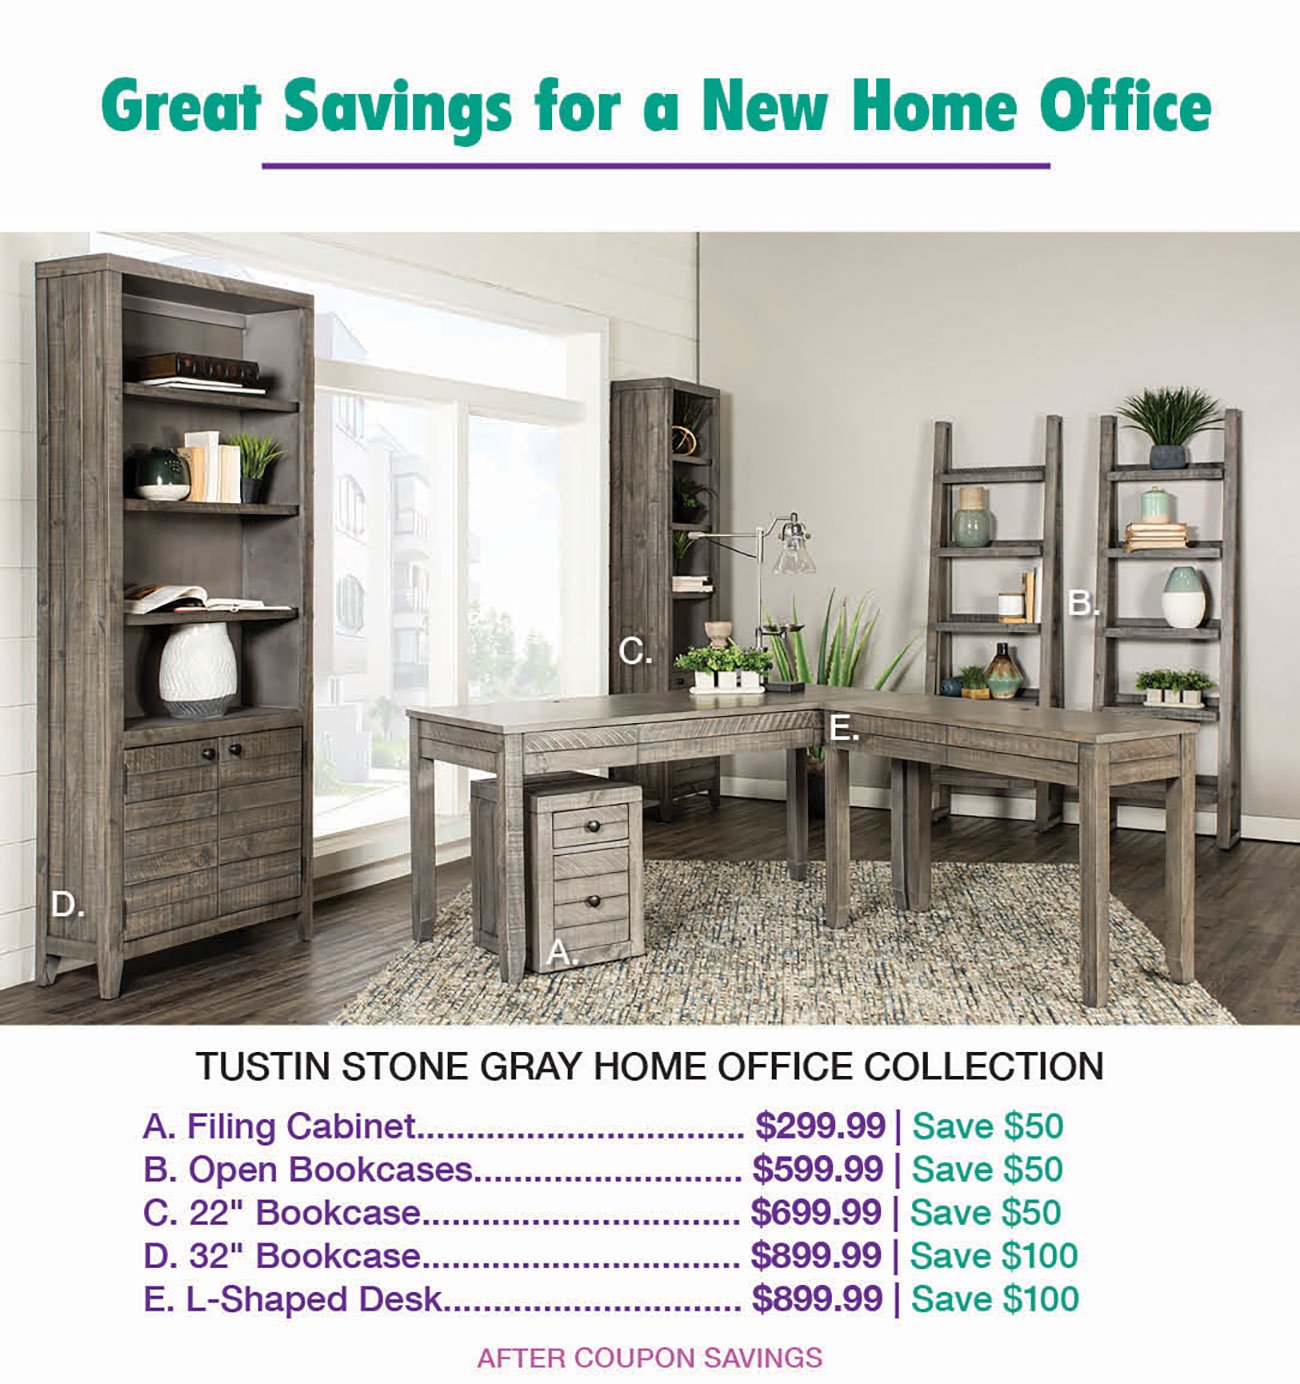 Tustin-Stone-Gray-Home-Office-Collection